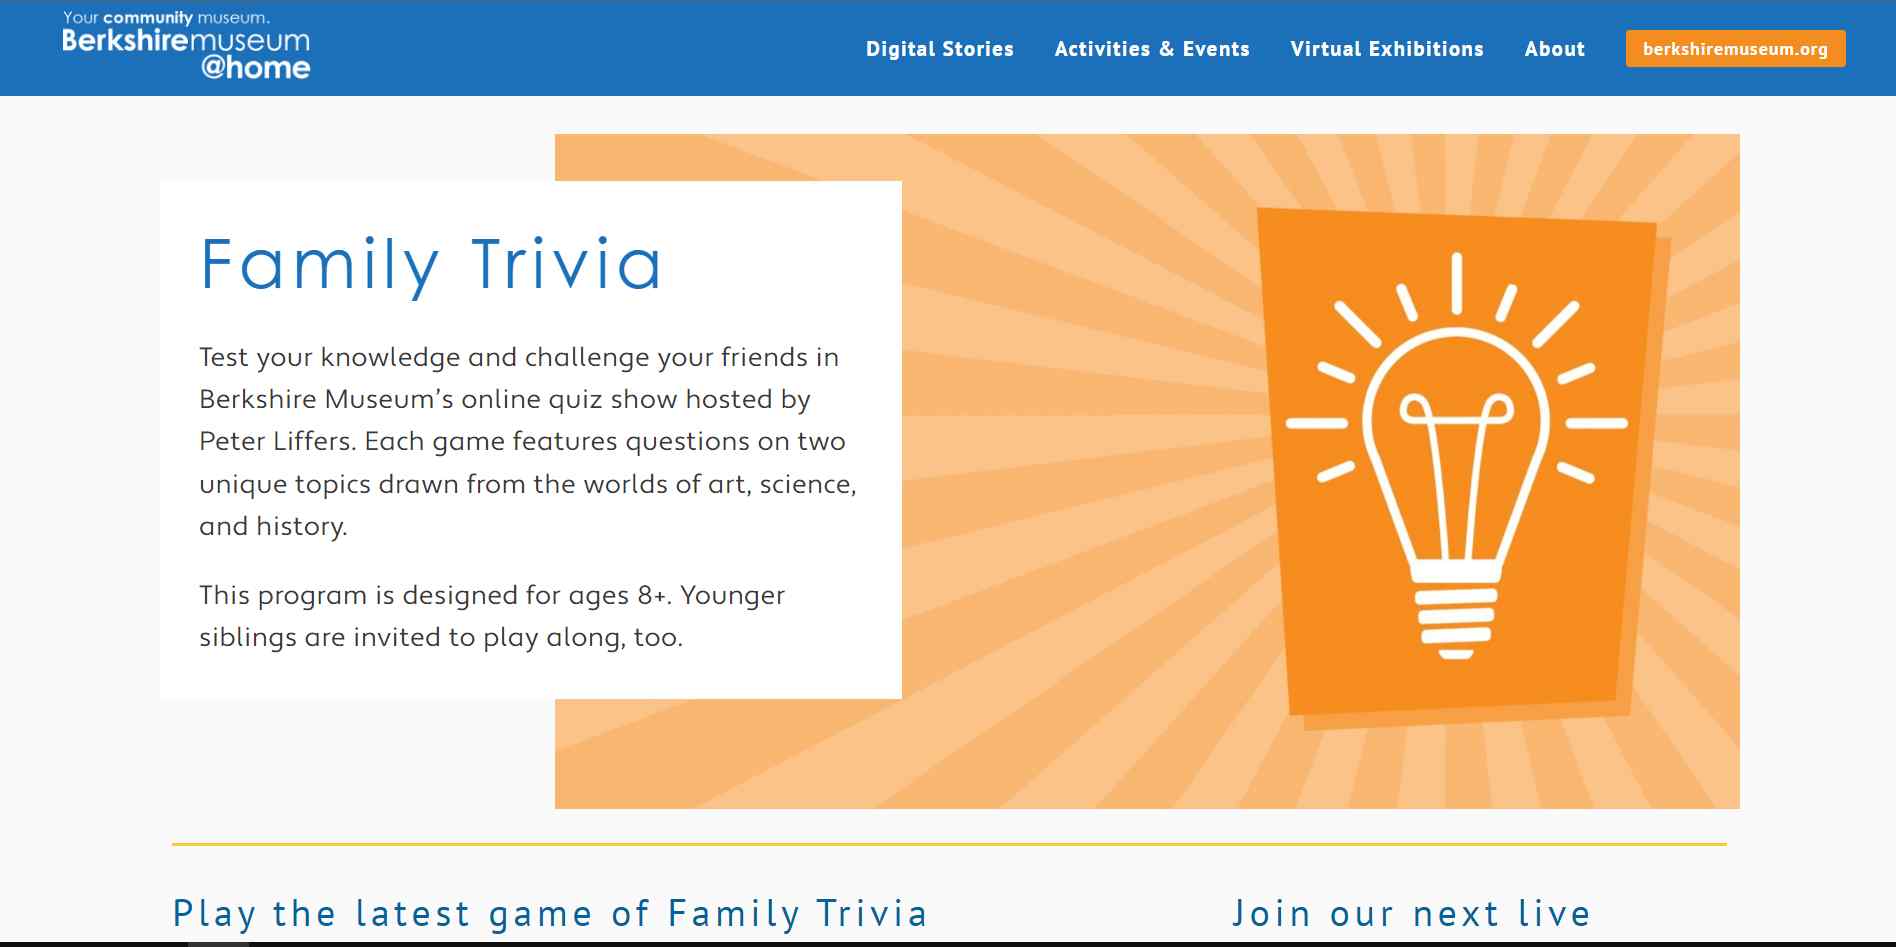 Family trivia at the Berkshire Museum is a fun and easy way for family members to get to know each other better.